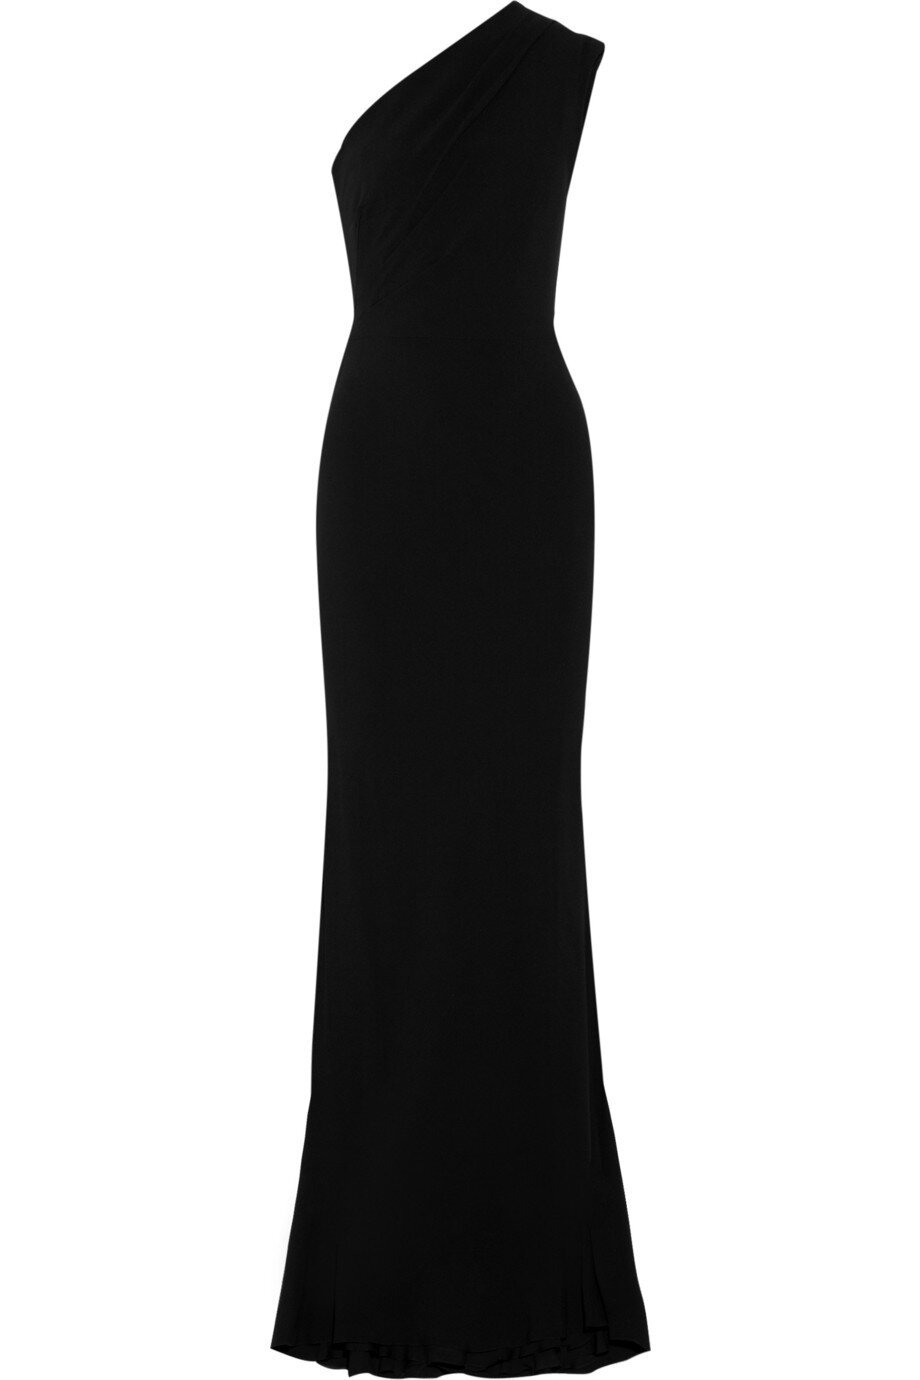 Ralph Lauren Collection One-Shoulder Crepe Gown in Black — UFO No More